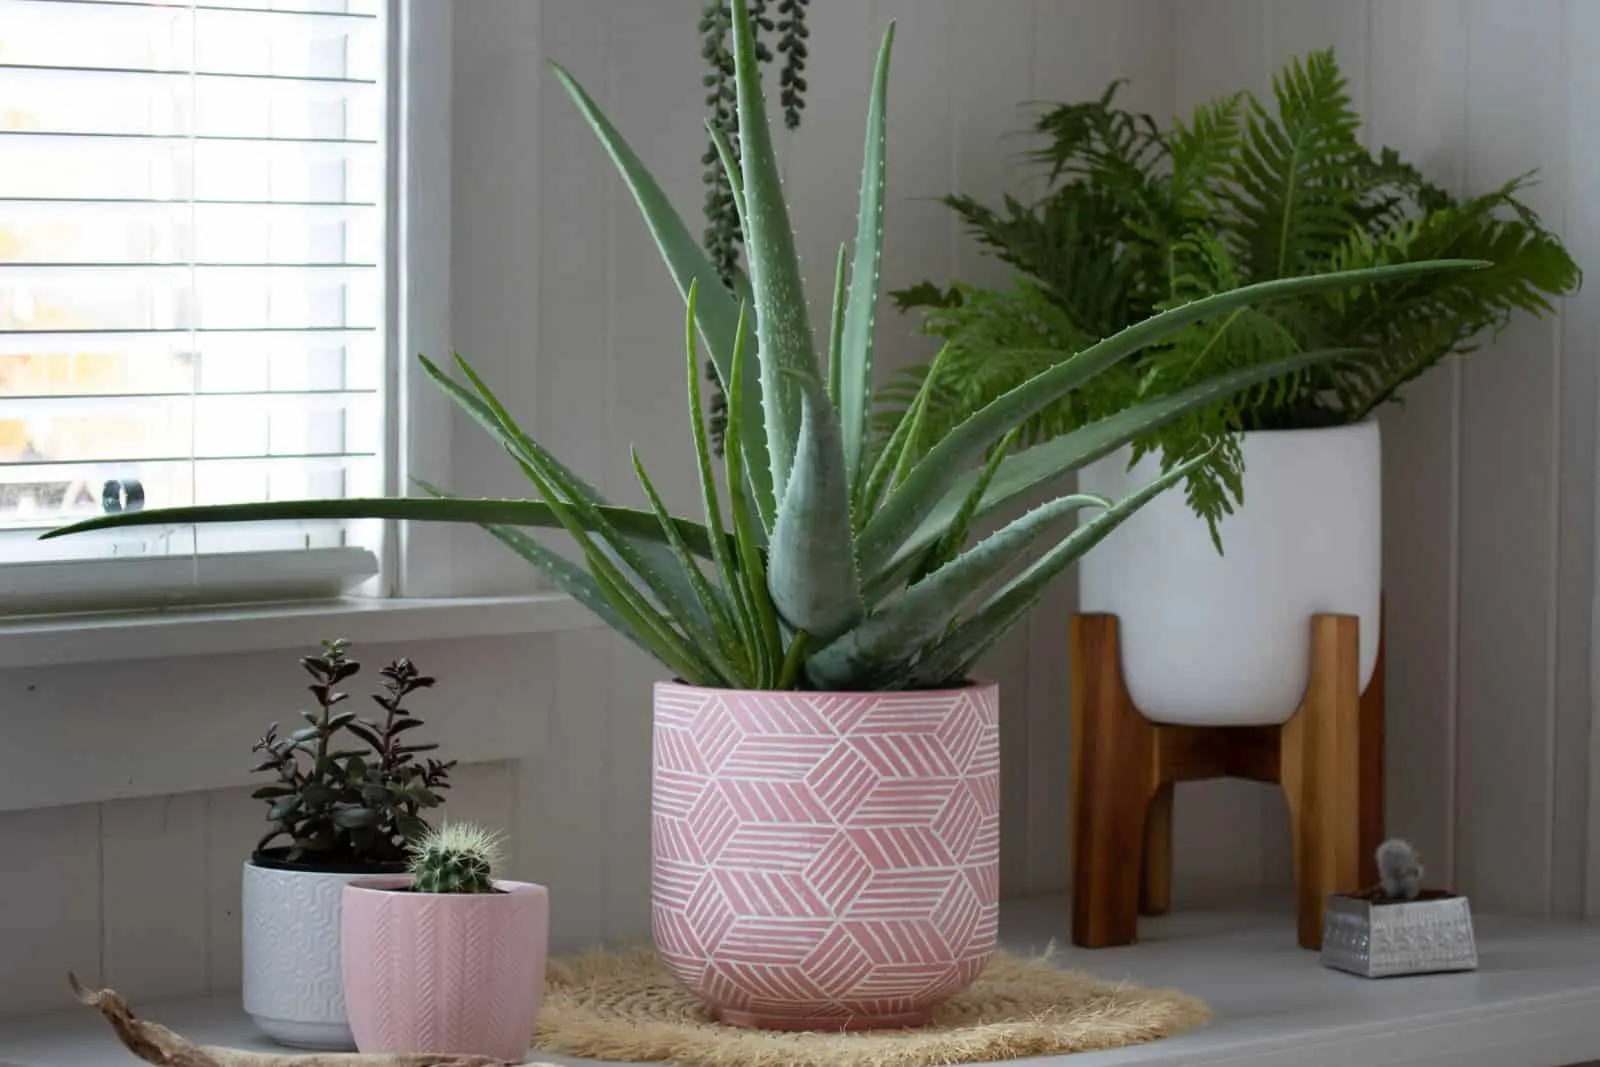 group of indoor pot plants aloe vera and cactus , in pink and white pots